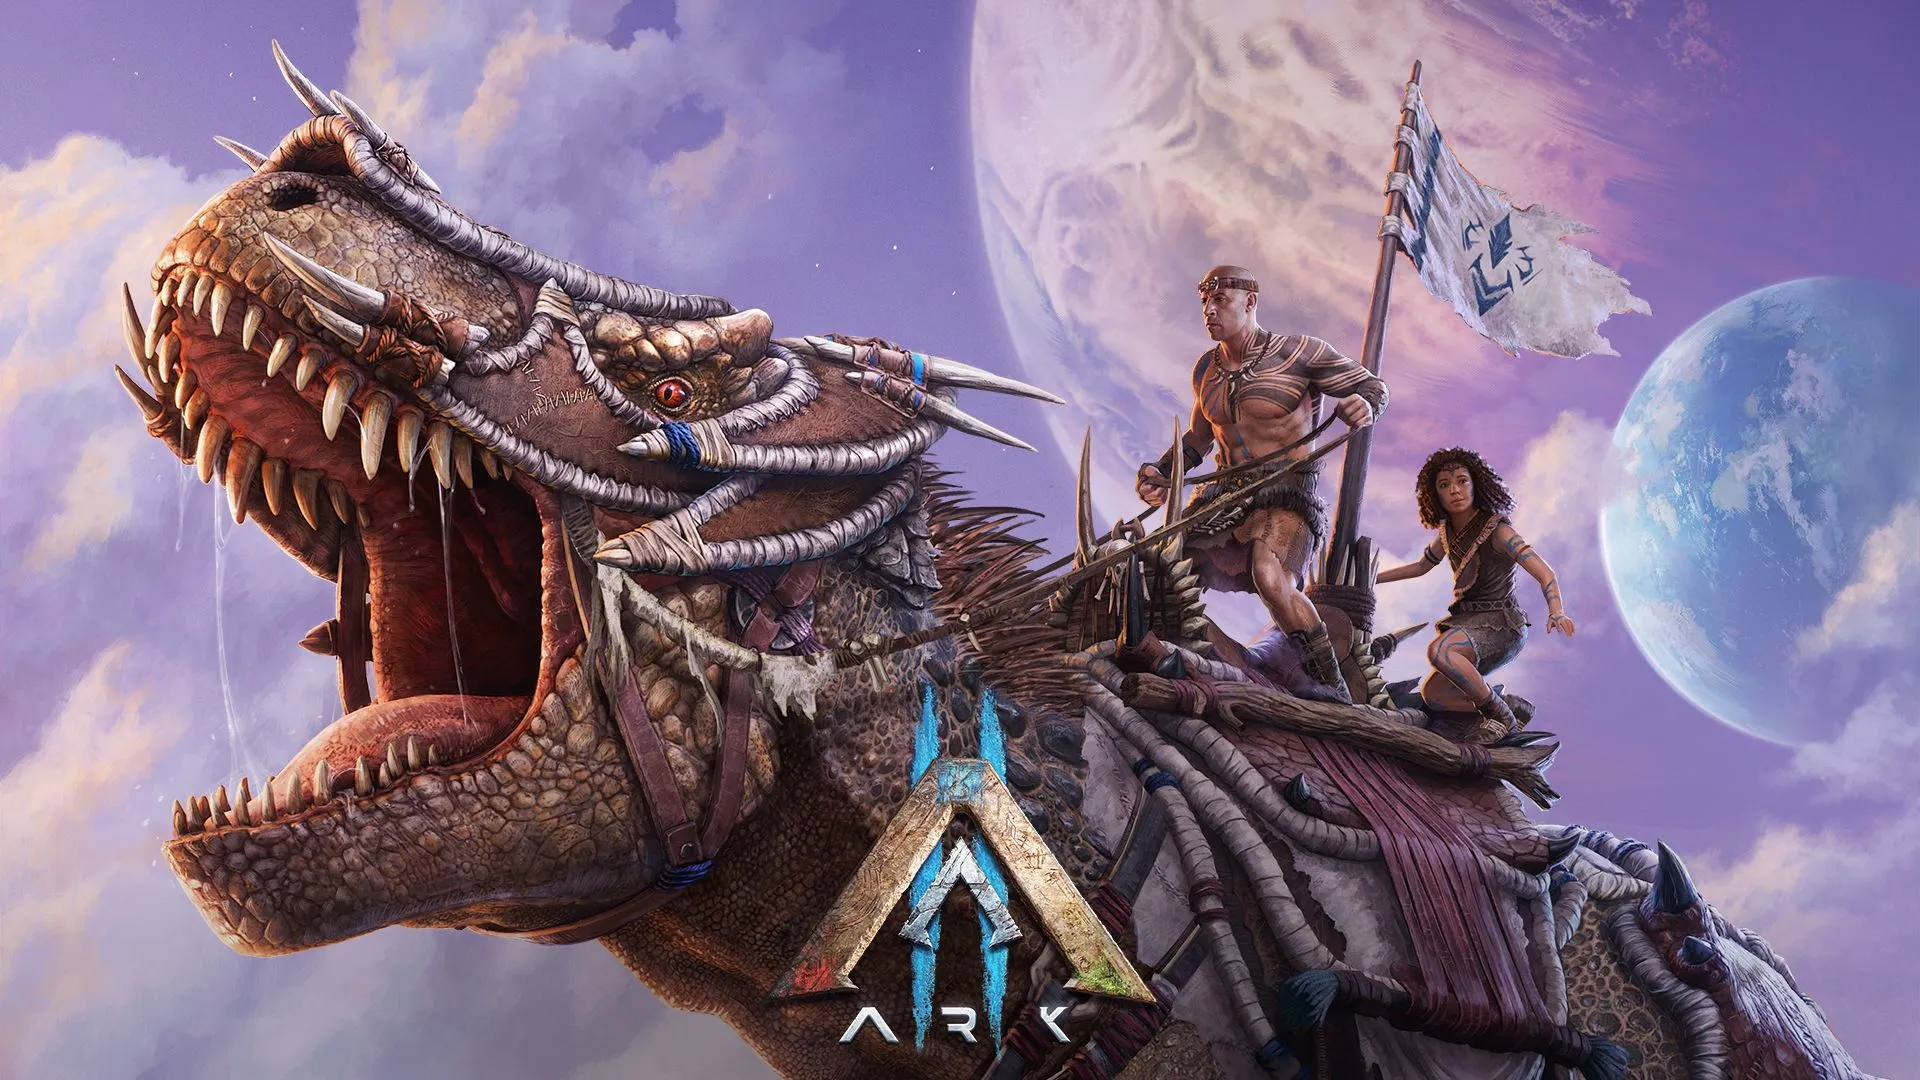 Ark 2 - What We Know So Far